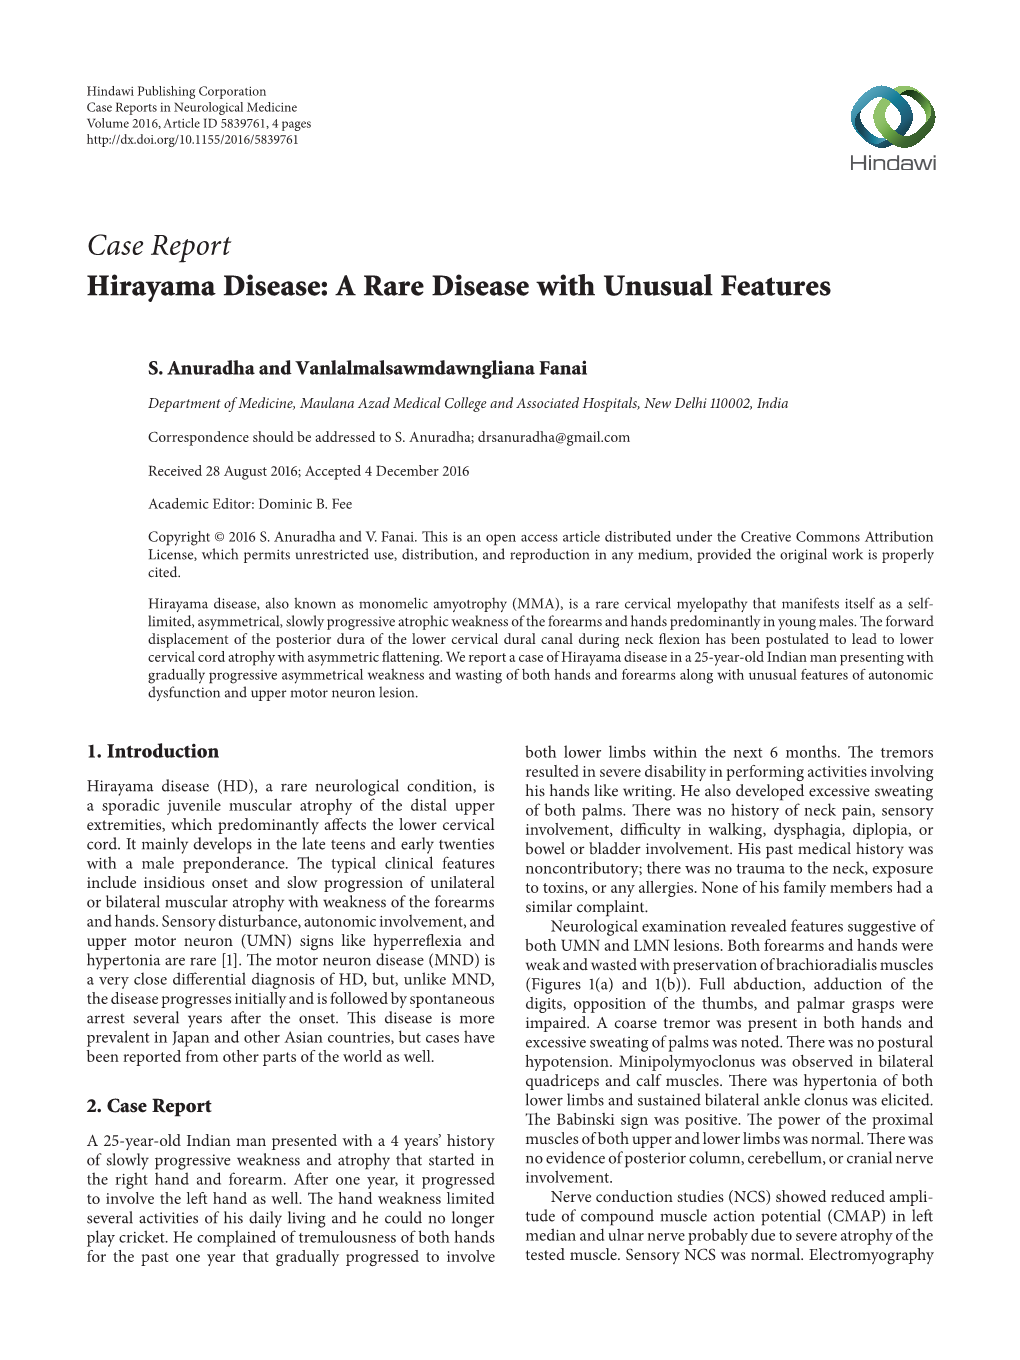 Case Report Hirayama Disease: a Rare Disease with Unusual Features